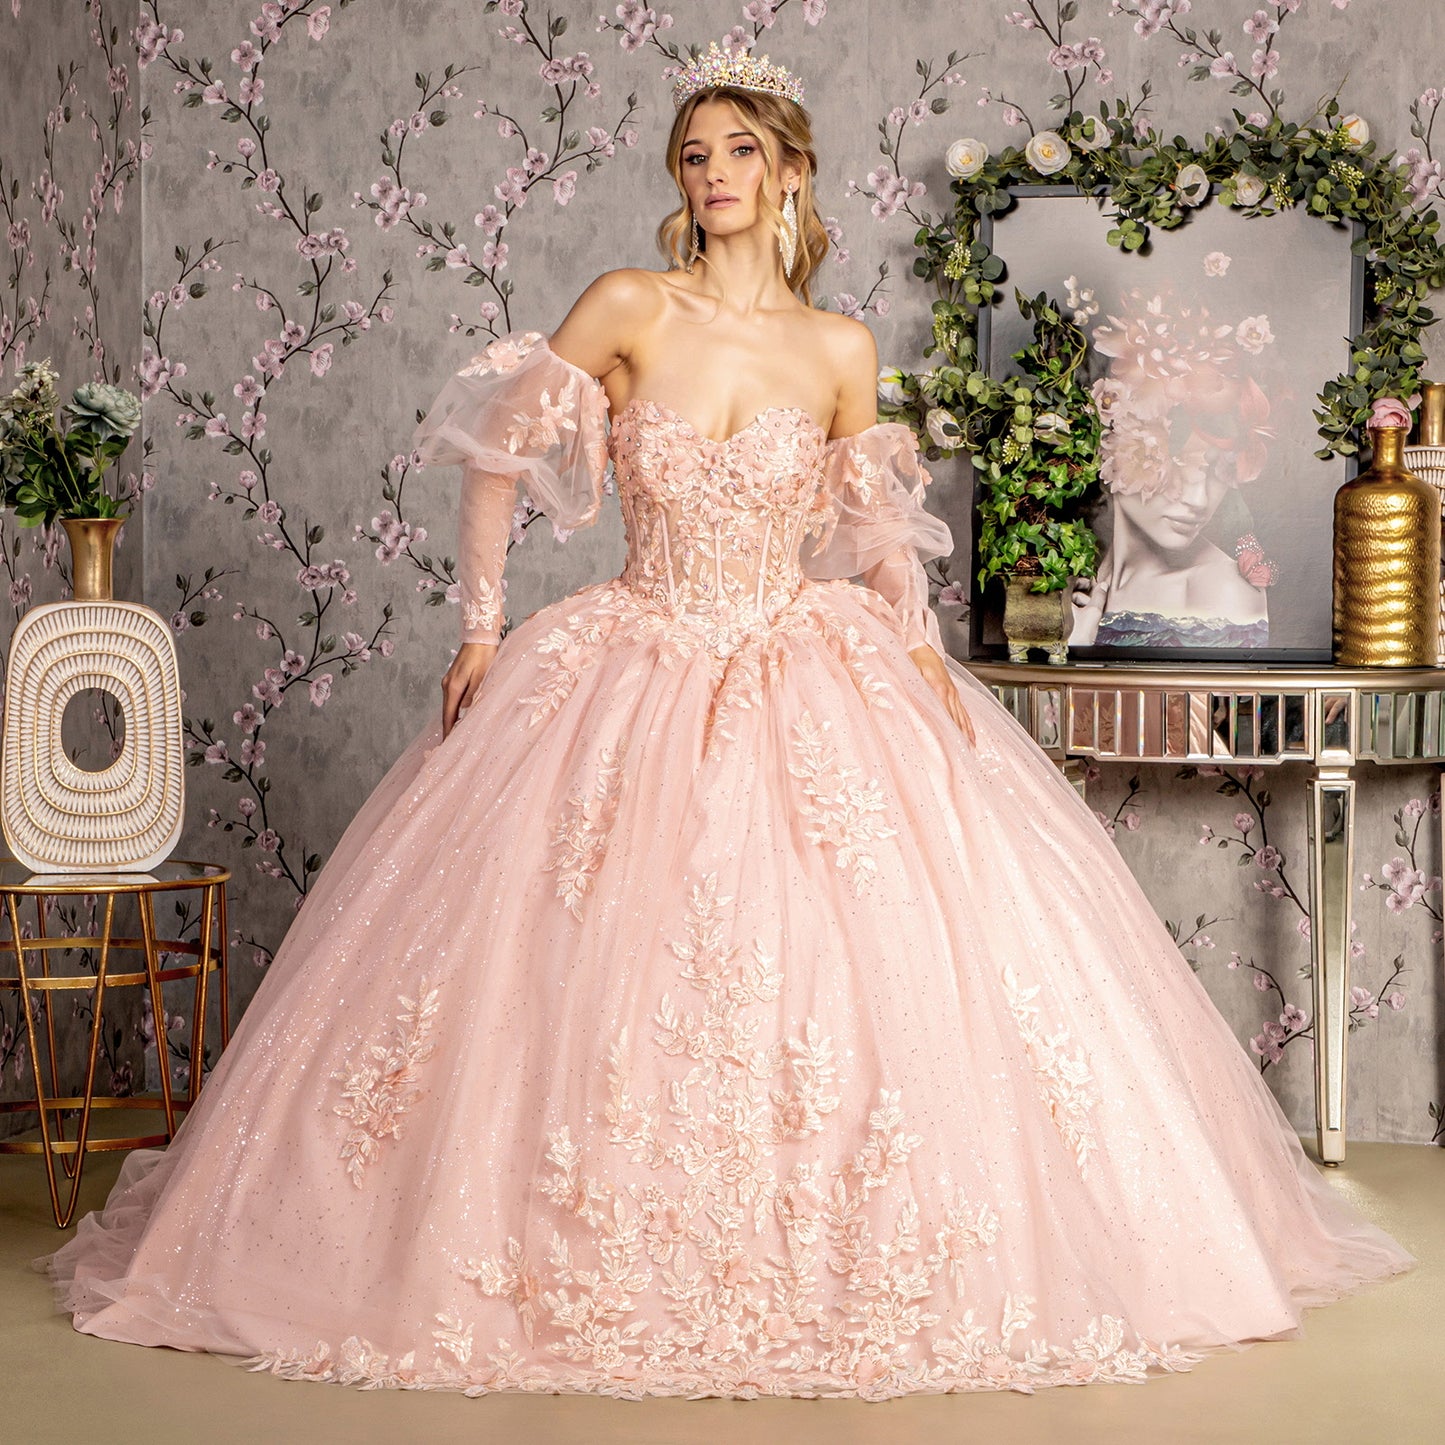 Glitter Embroidery Sheer Bodice Mesh Ball Gown w/ Long Puff Sleeves